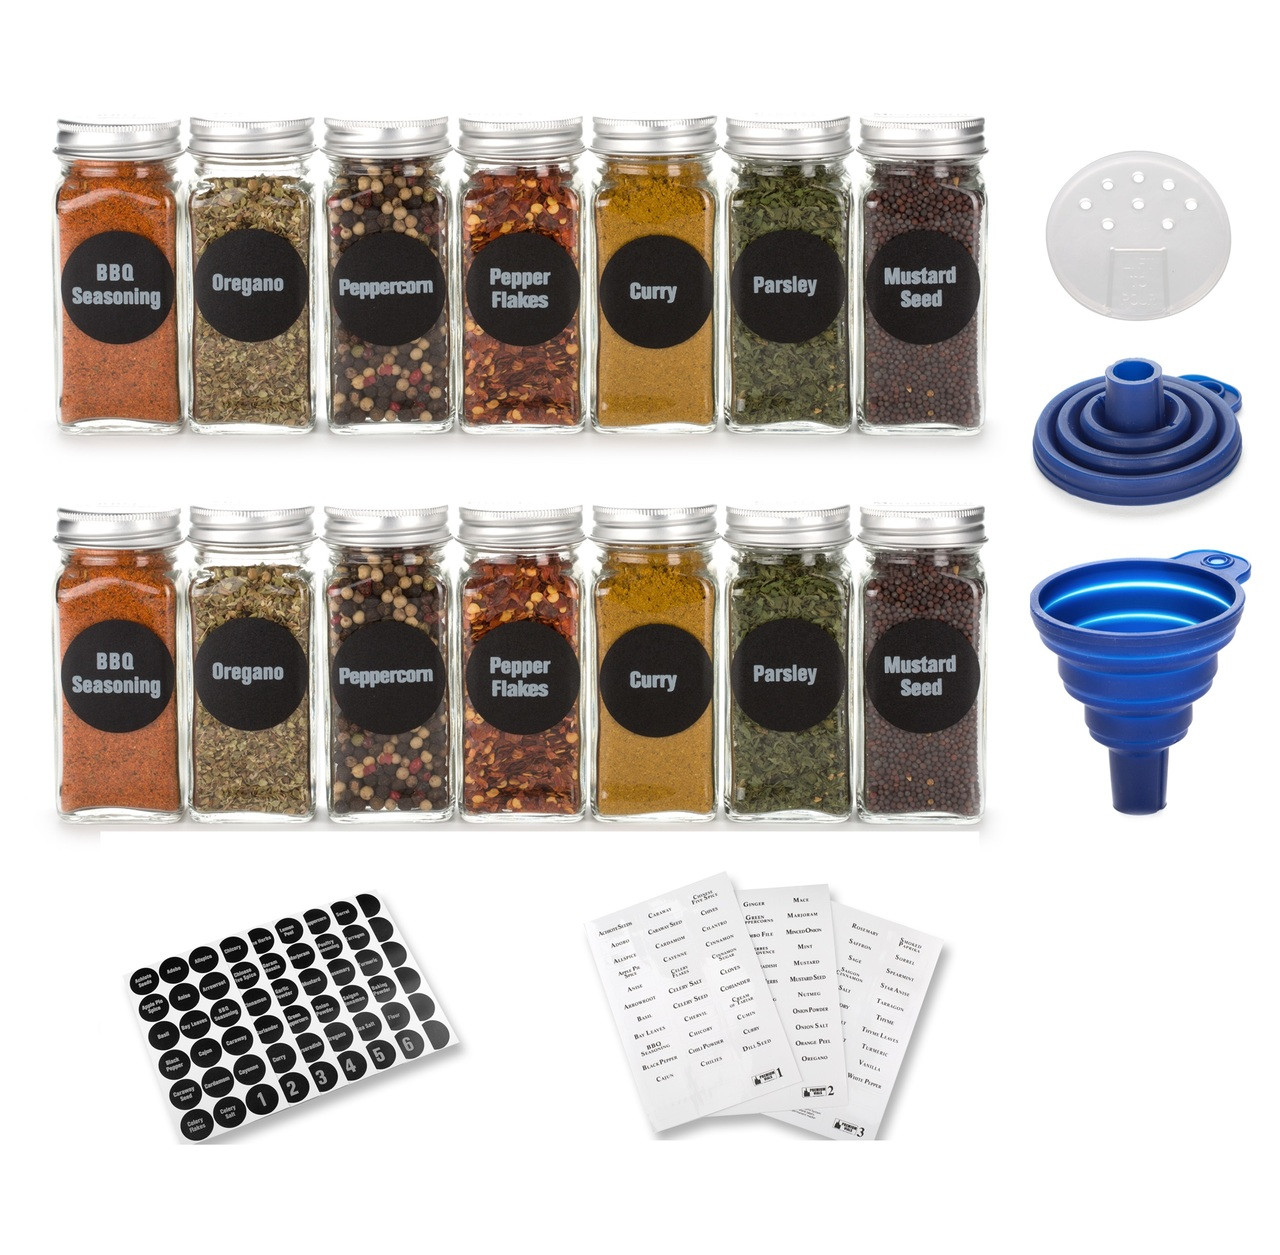 MECKILY Set of 24 Spice Jar Square Glass Jars Capacity 120 ml Airtight Cap Board & Transparent Label Shaker Insert Tops and Wide Funnel Complete Organiser Set